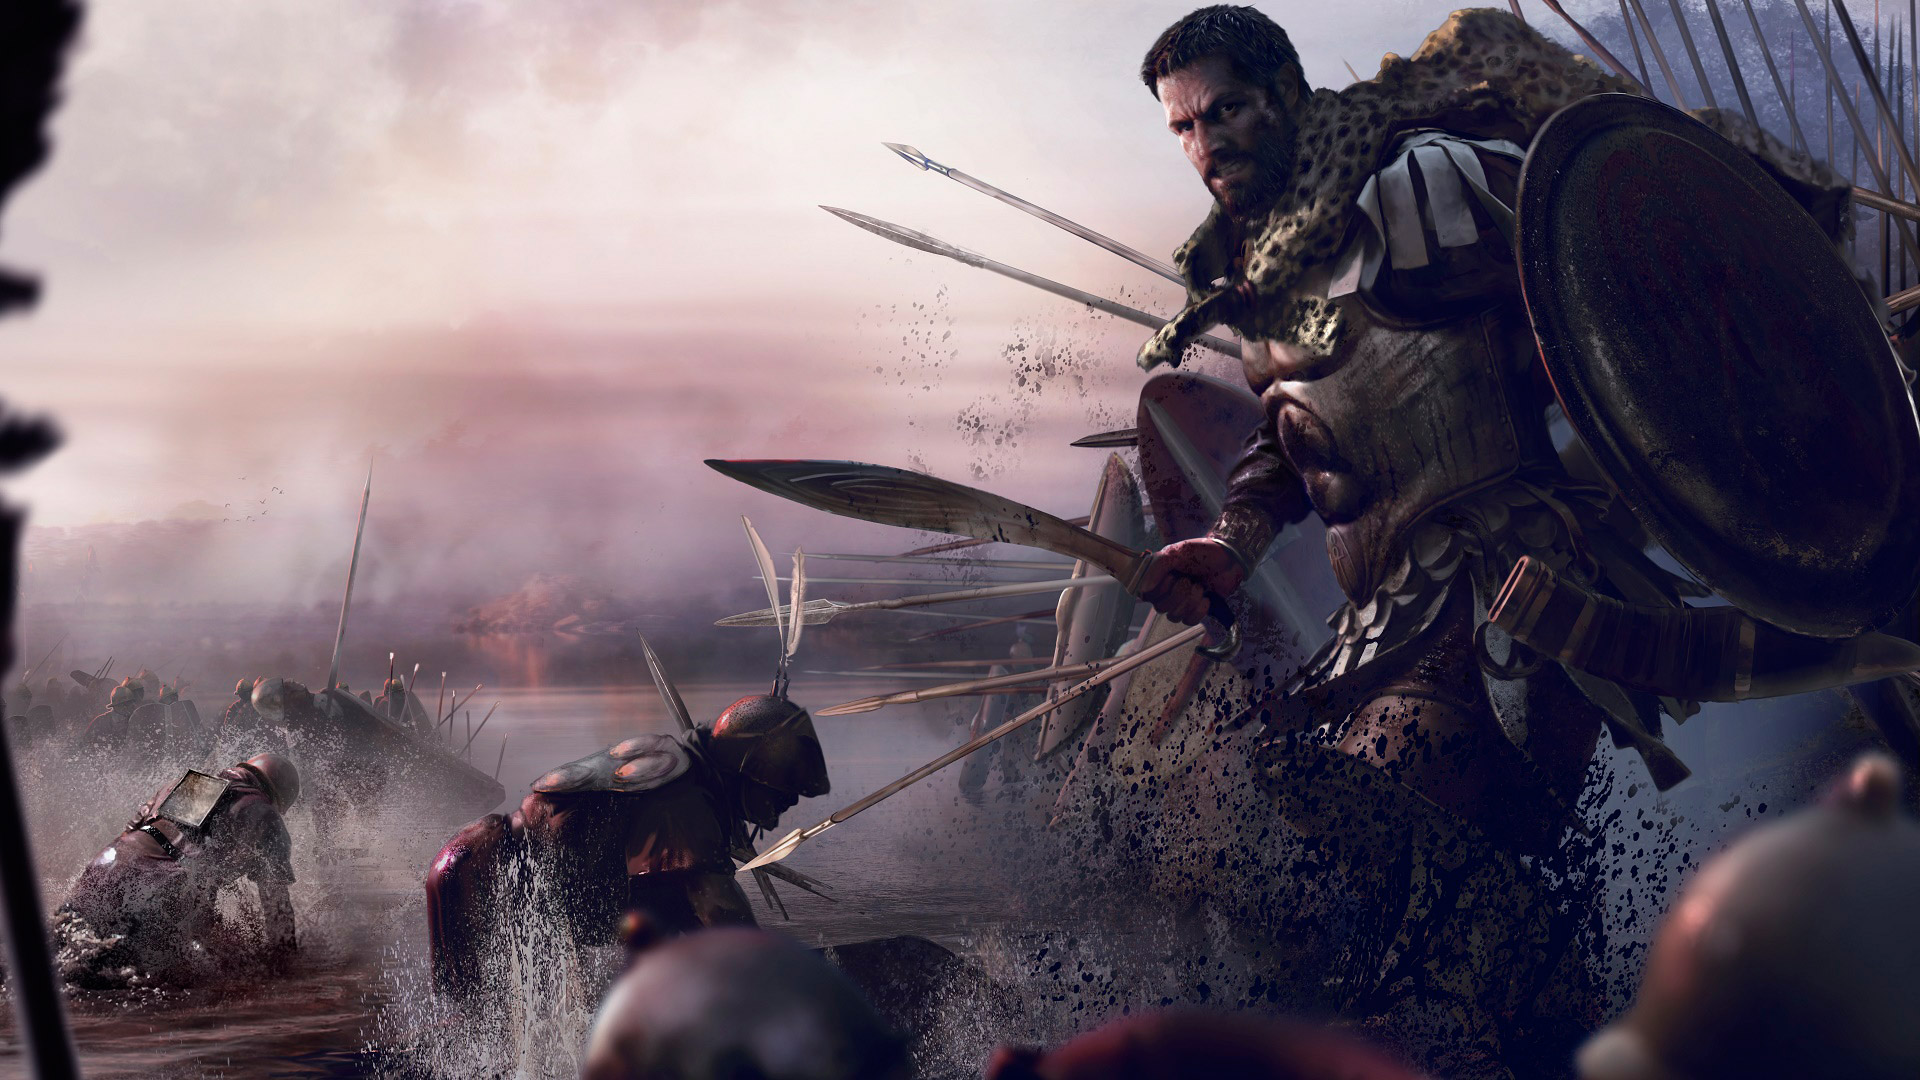  wallpapers of Total War Rome 2 You are downloading Total War Rome 2 1920x1080